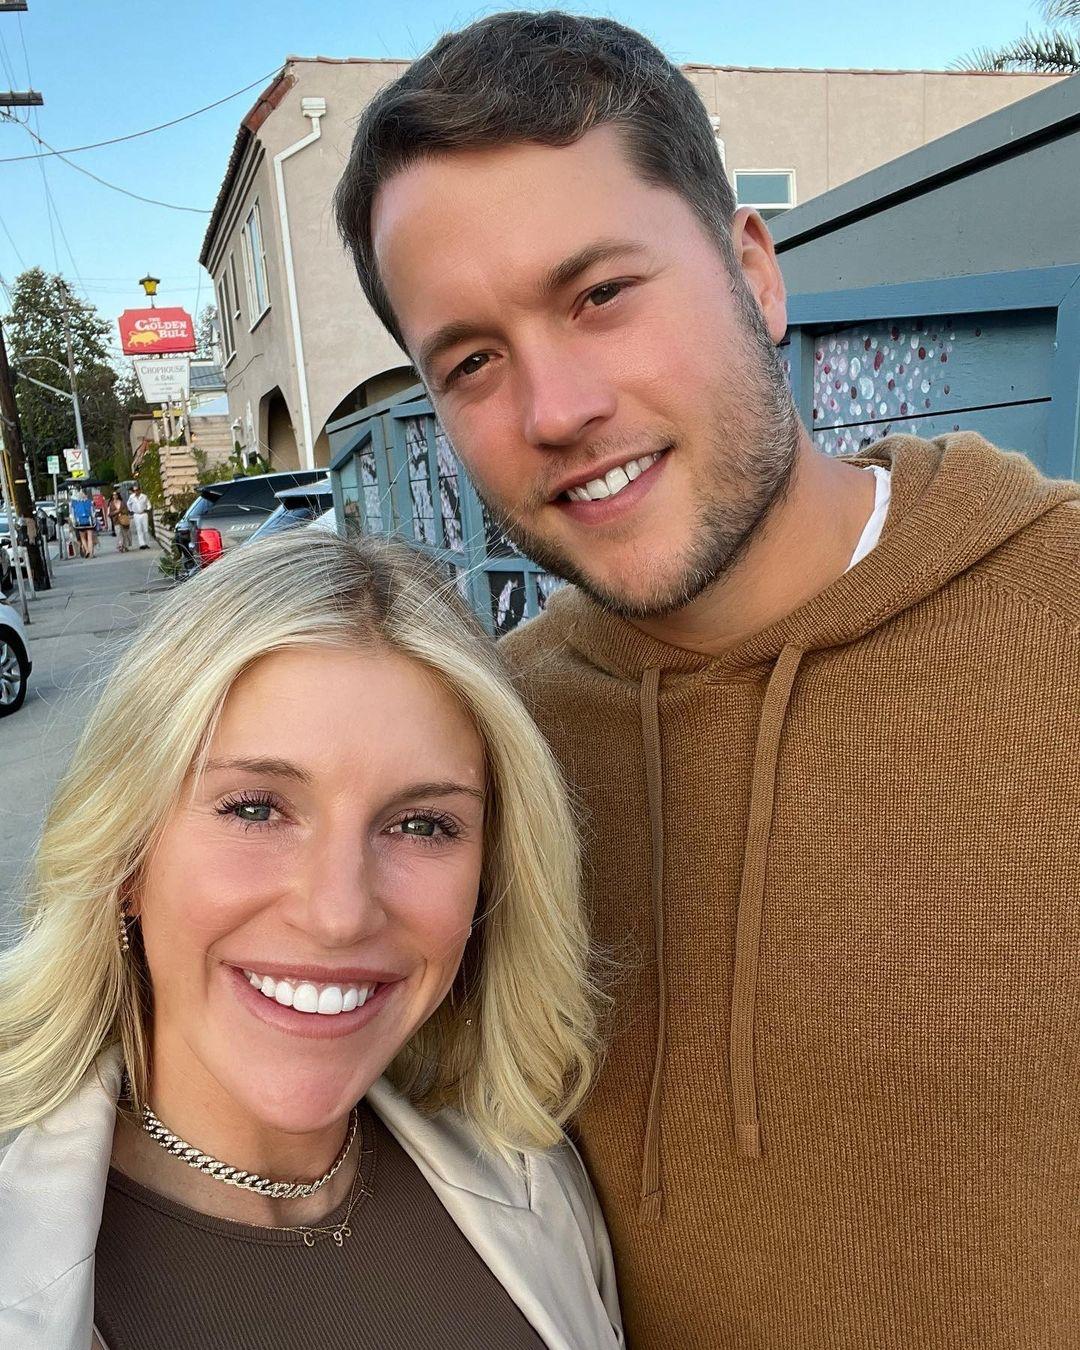 Matthew Stafford, wife Kelly donating meals to hospital workers